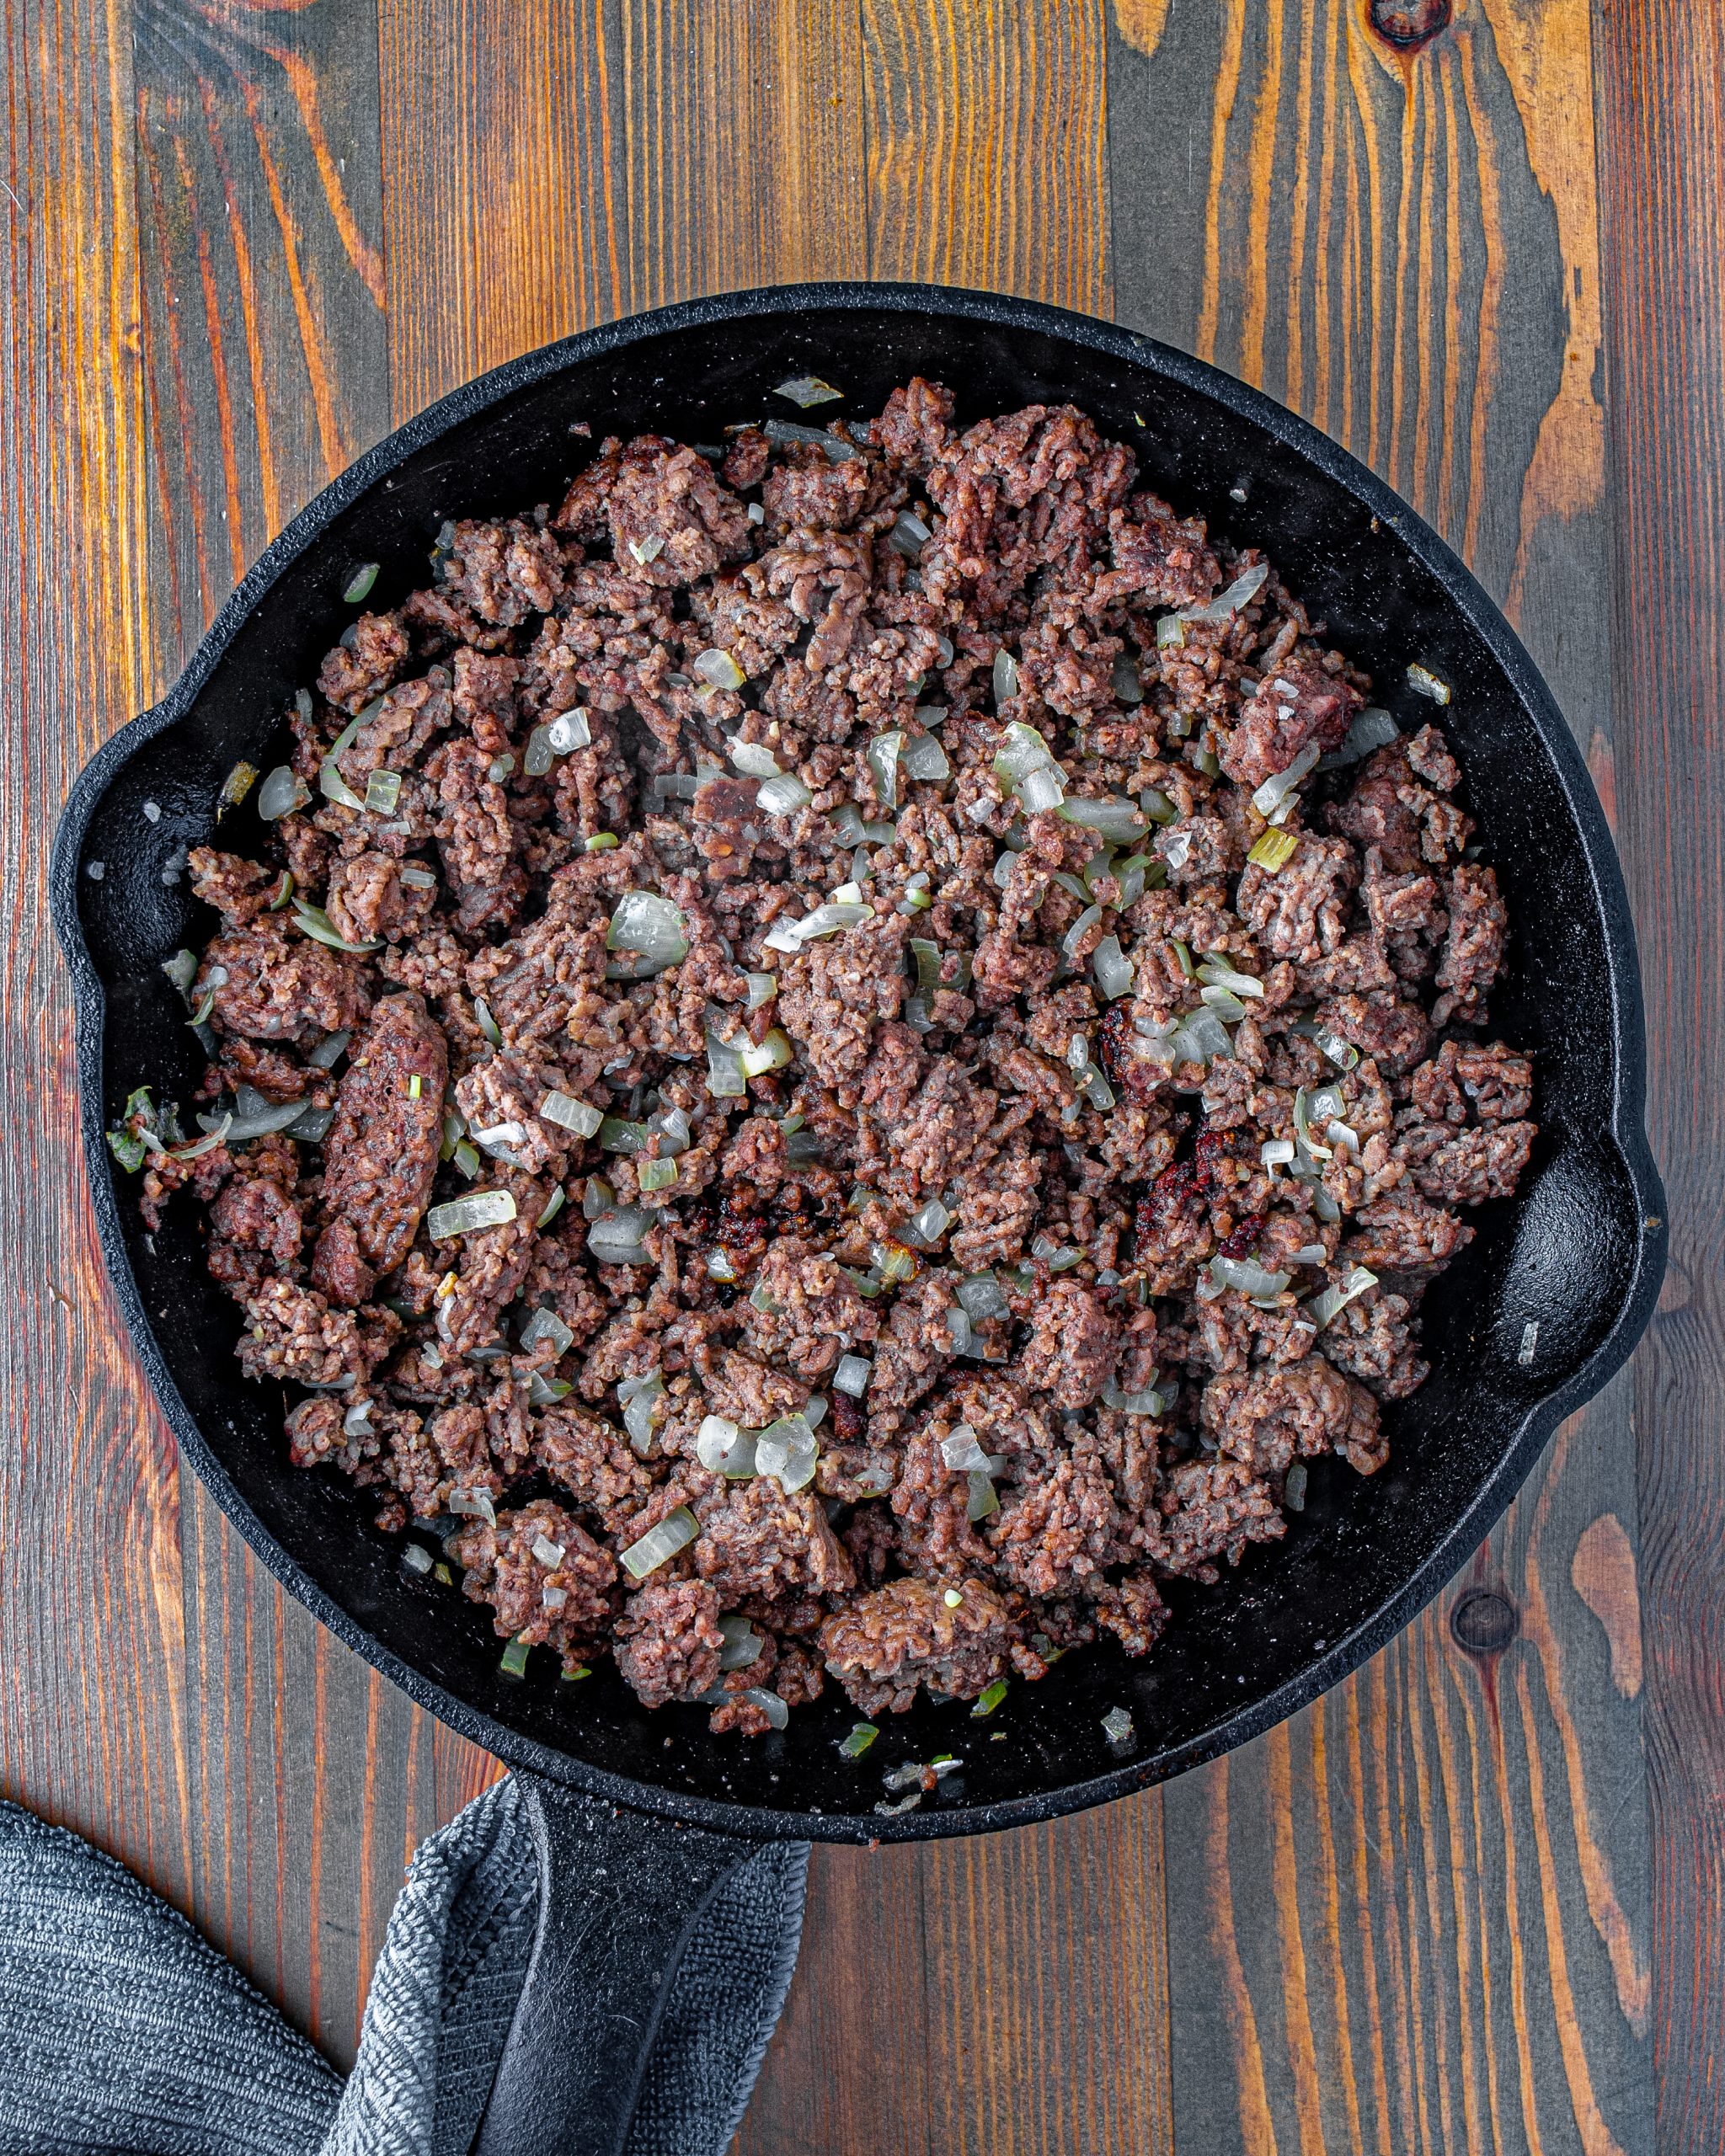 Place the ground beef and onion in an oven-safe skillet over medium-high heat on the stove. Saute until the meat is browned and the onions have softened.